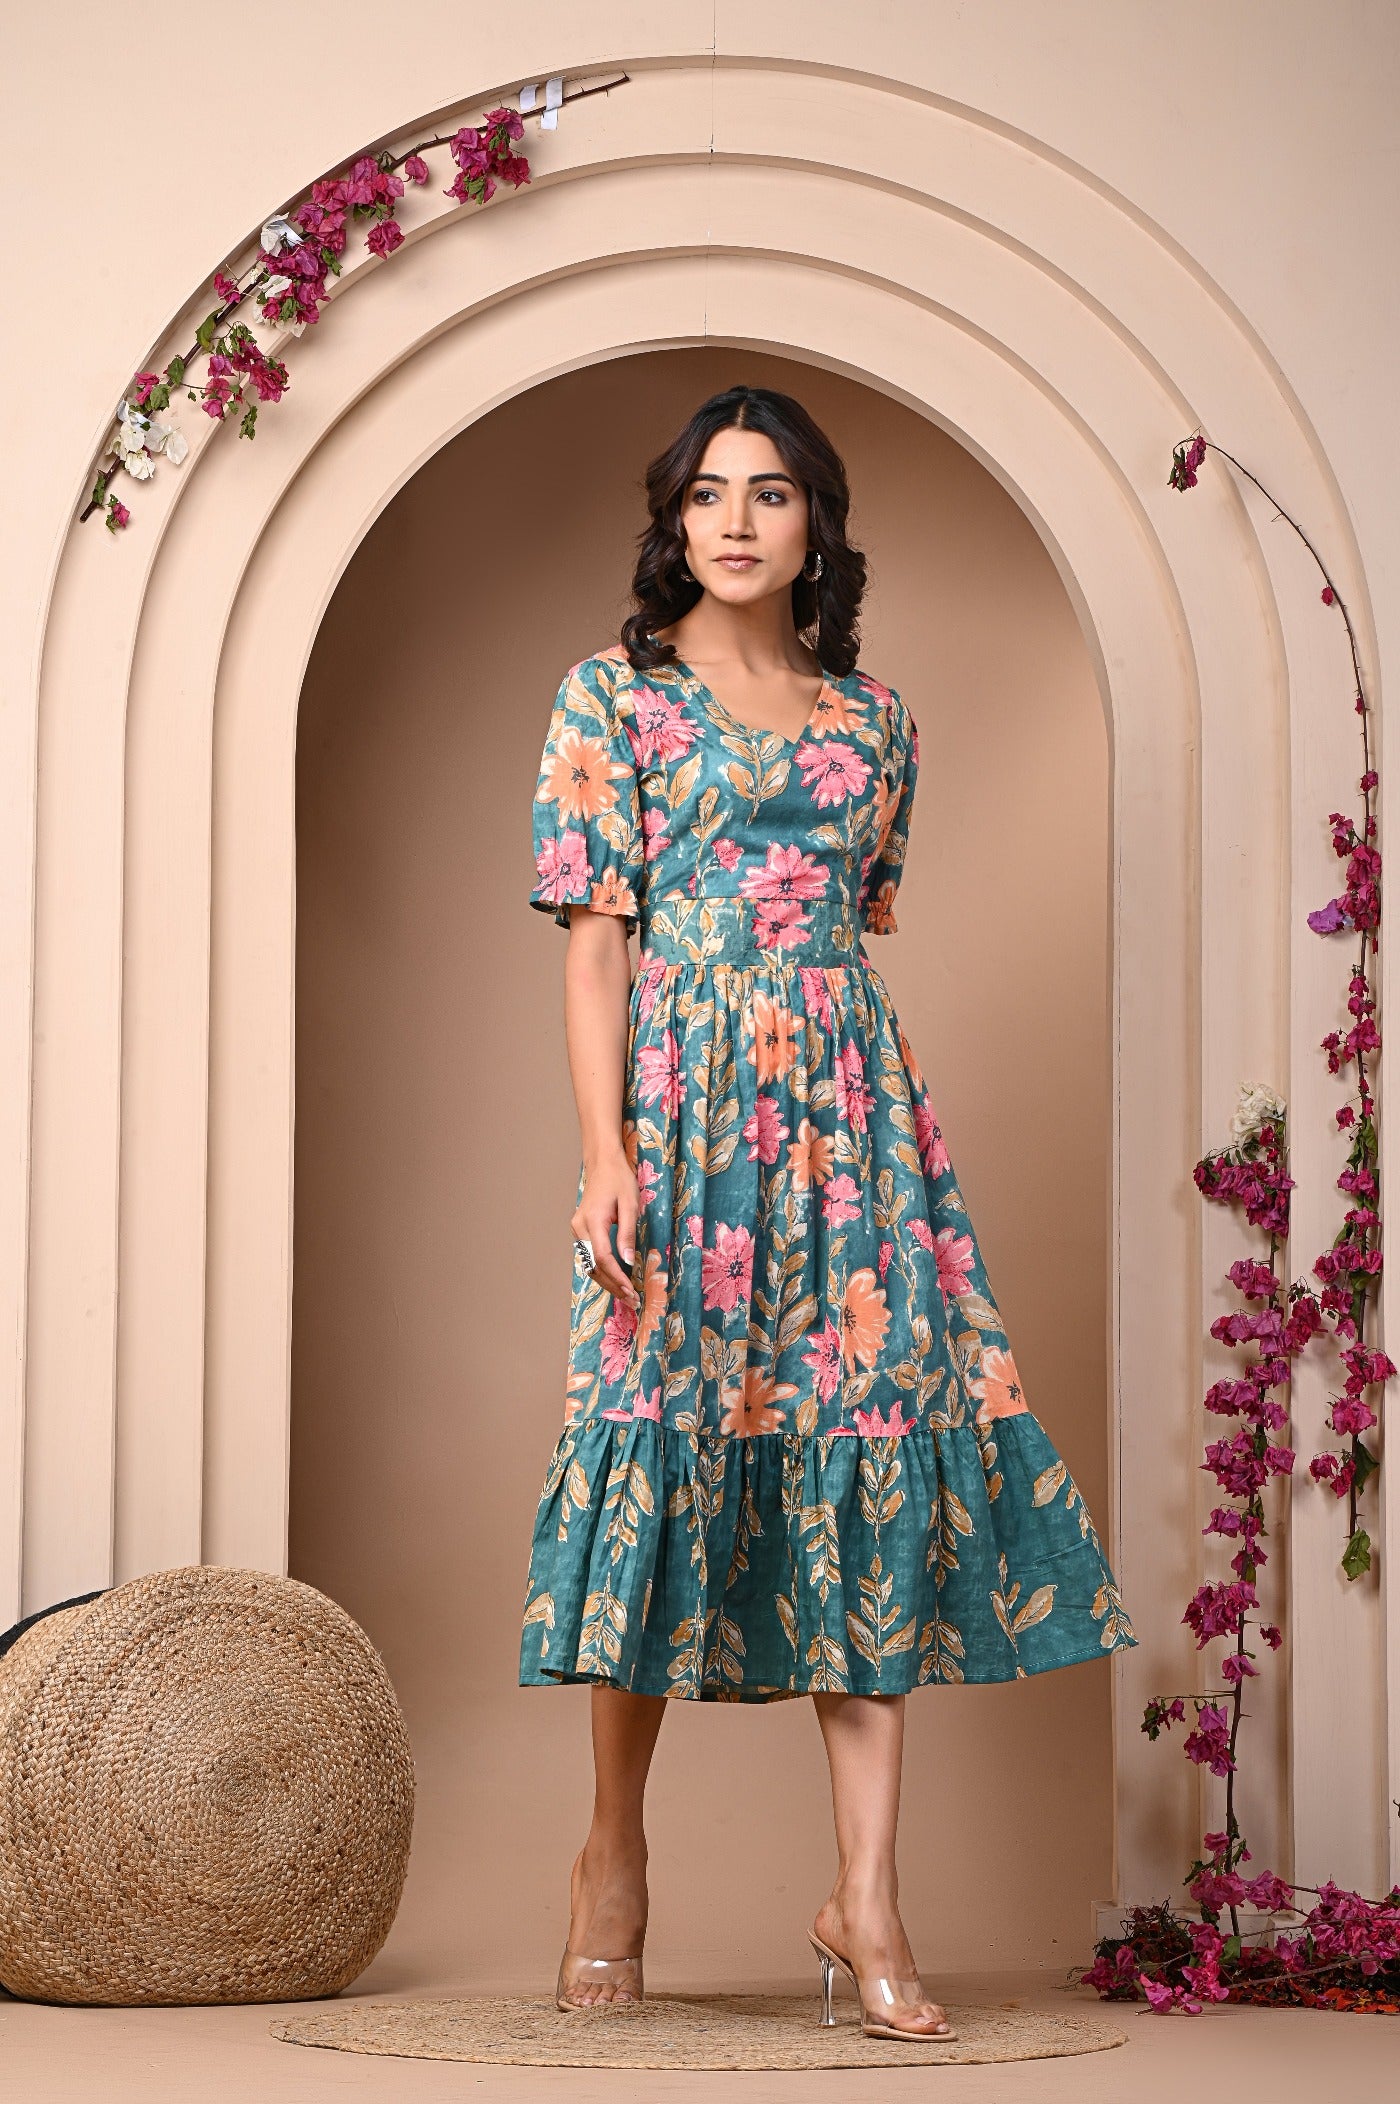 Embrace Floral Elegance with Aaronee Cotton Flower Printed Middy.